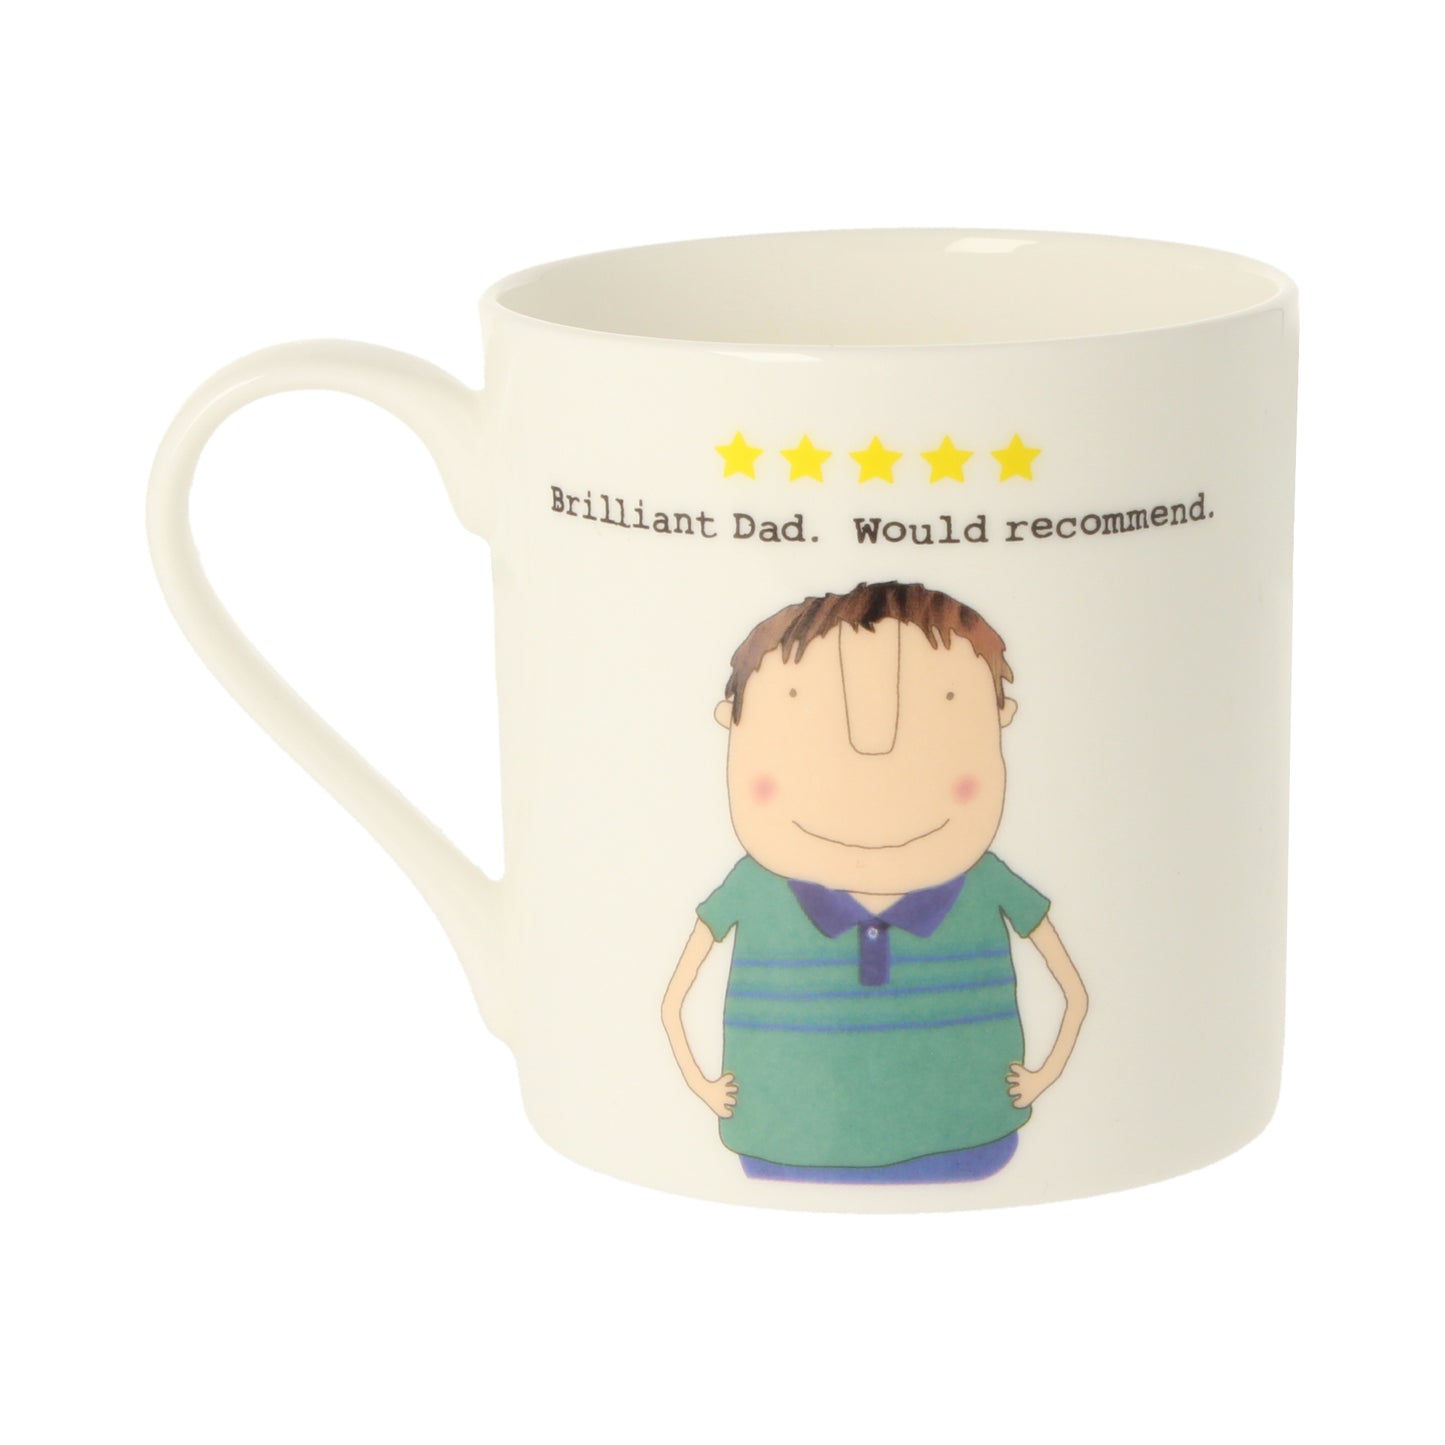 Rosie Made A Thing Brilliant Dad 5 Star Would Recommend Mug Funny Gift Idea